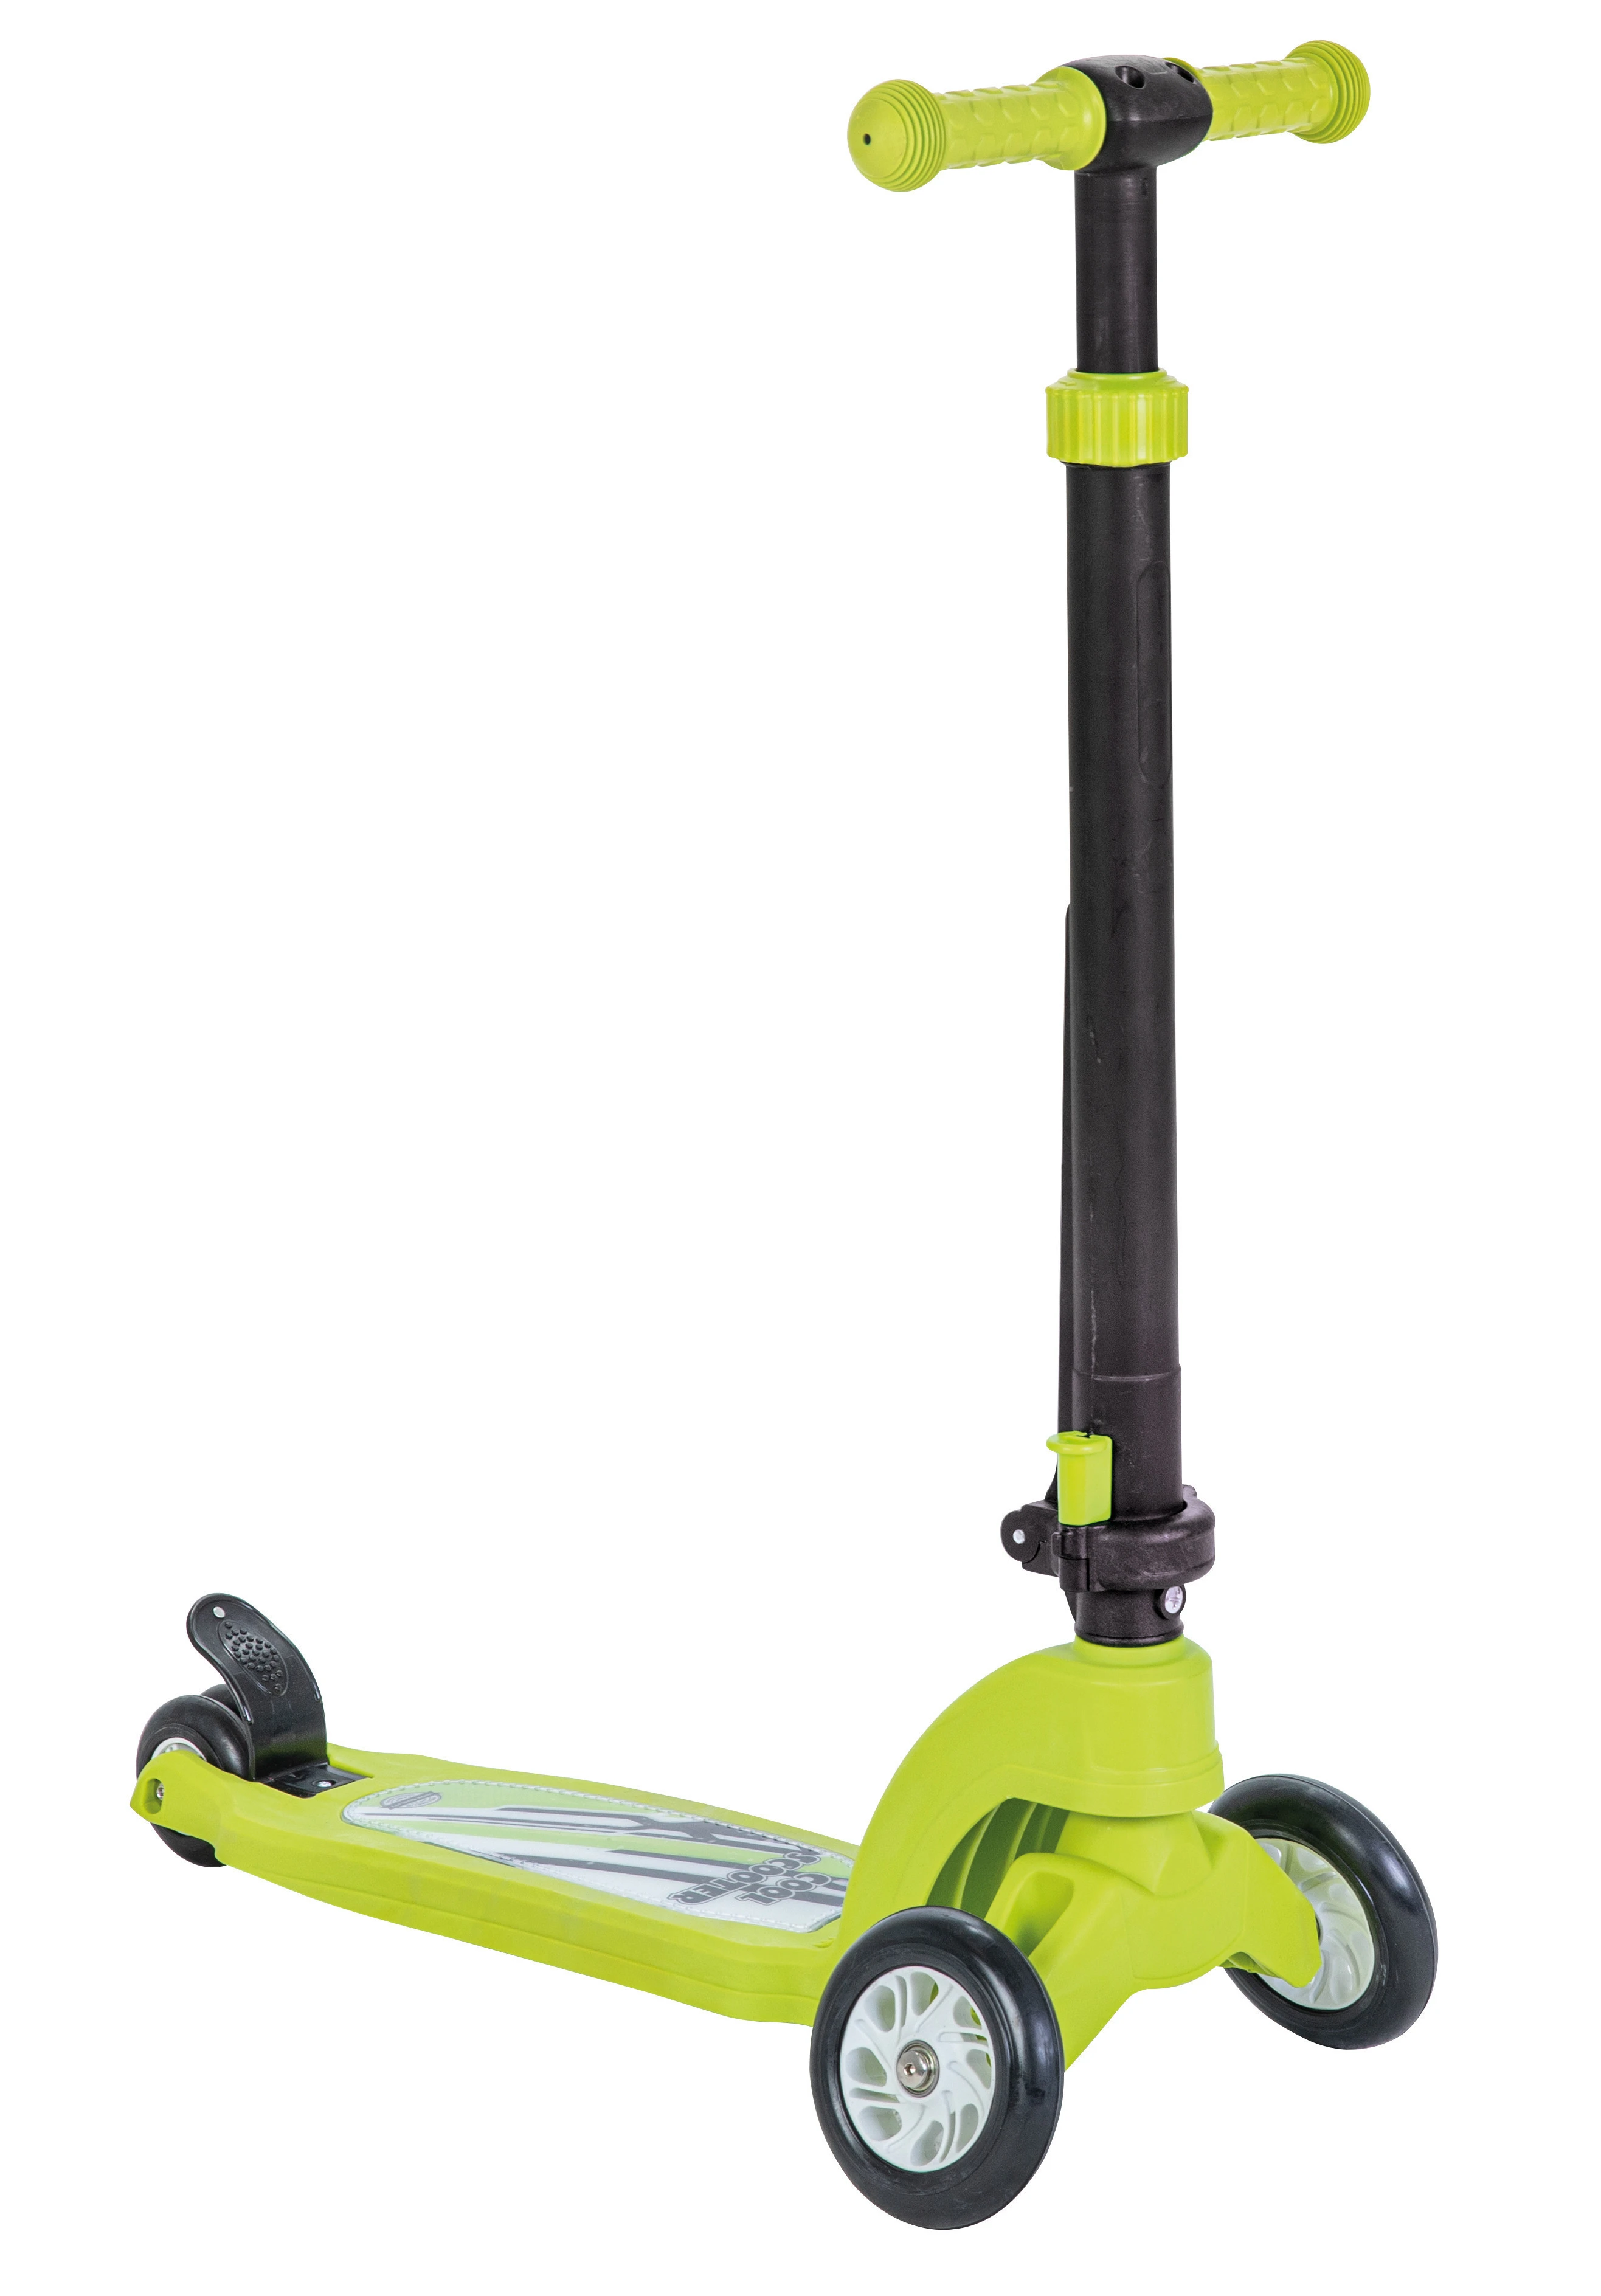 Wheels Kick Scooter for Kids and Toddlers Girls &amp; Boys, Adjustable Height,Learn to Steer with Wide Lights Wheels During Movement